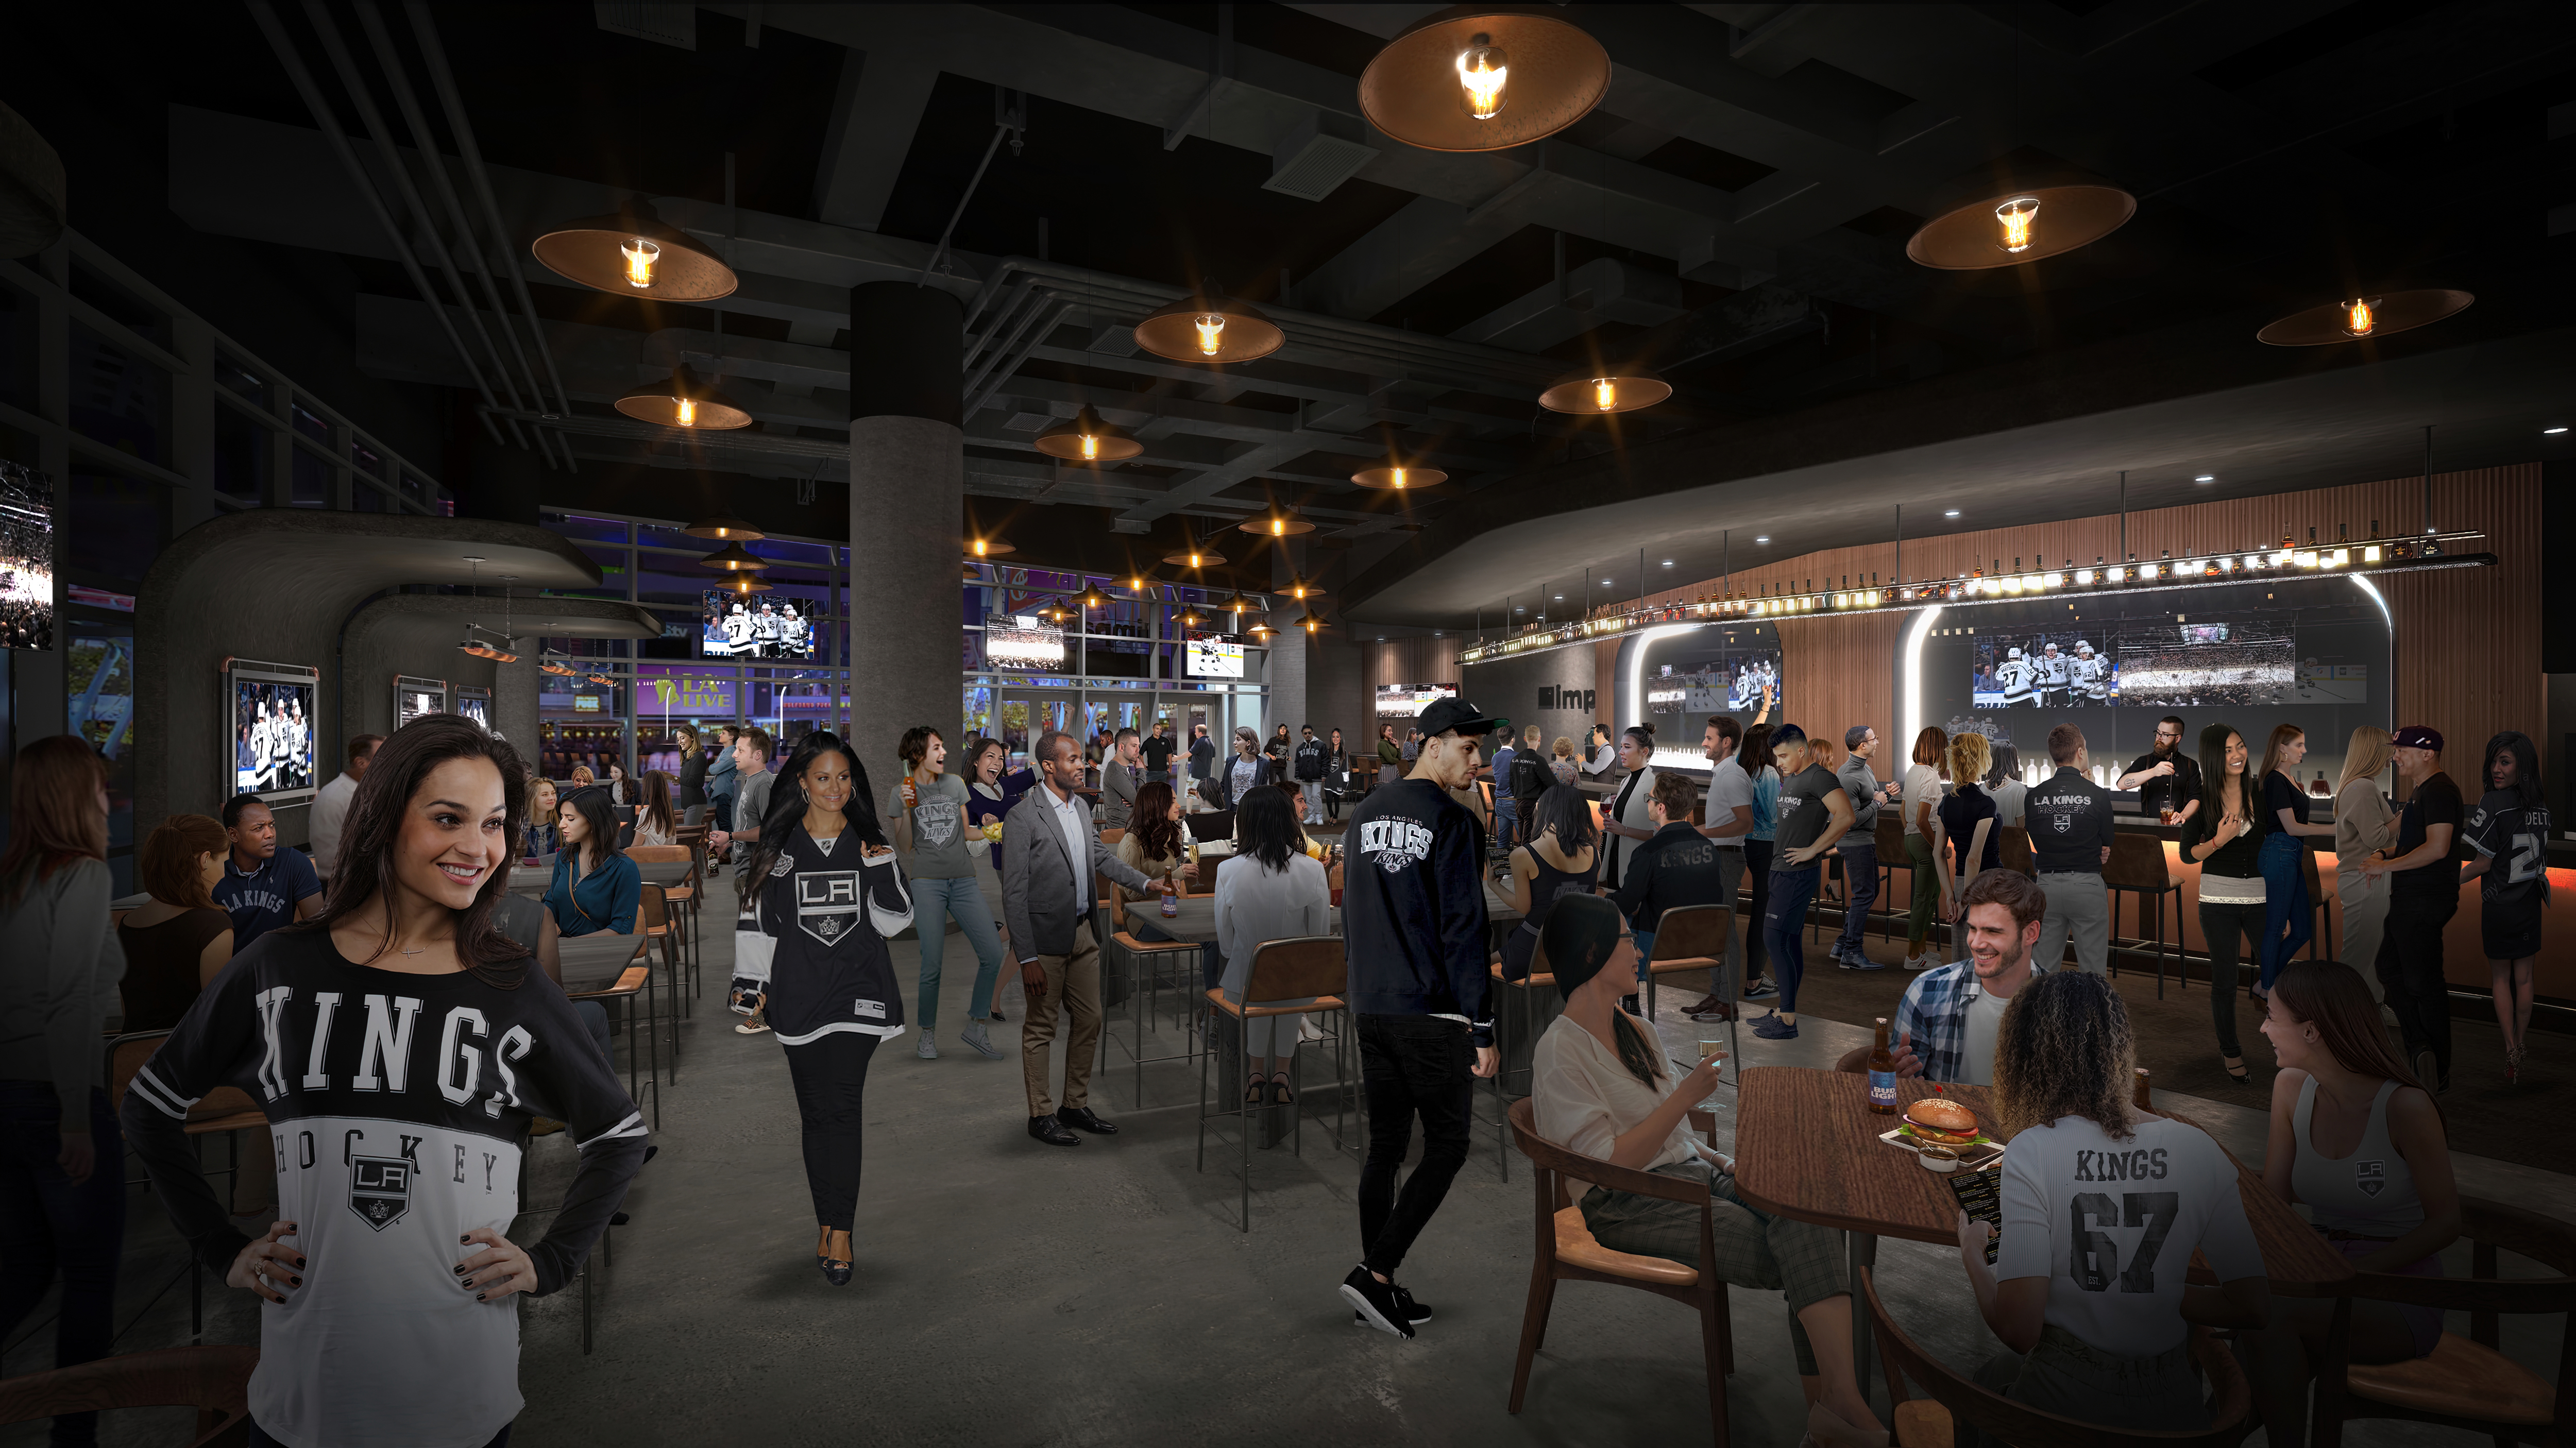 L.A. Kings tease first phase of Crypto.com Arena overhaul